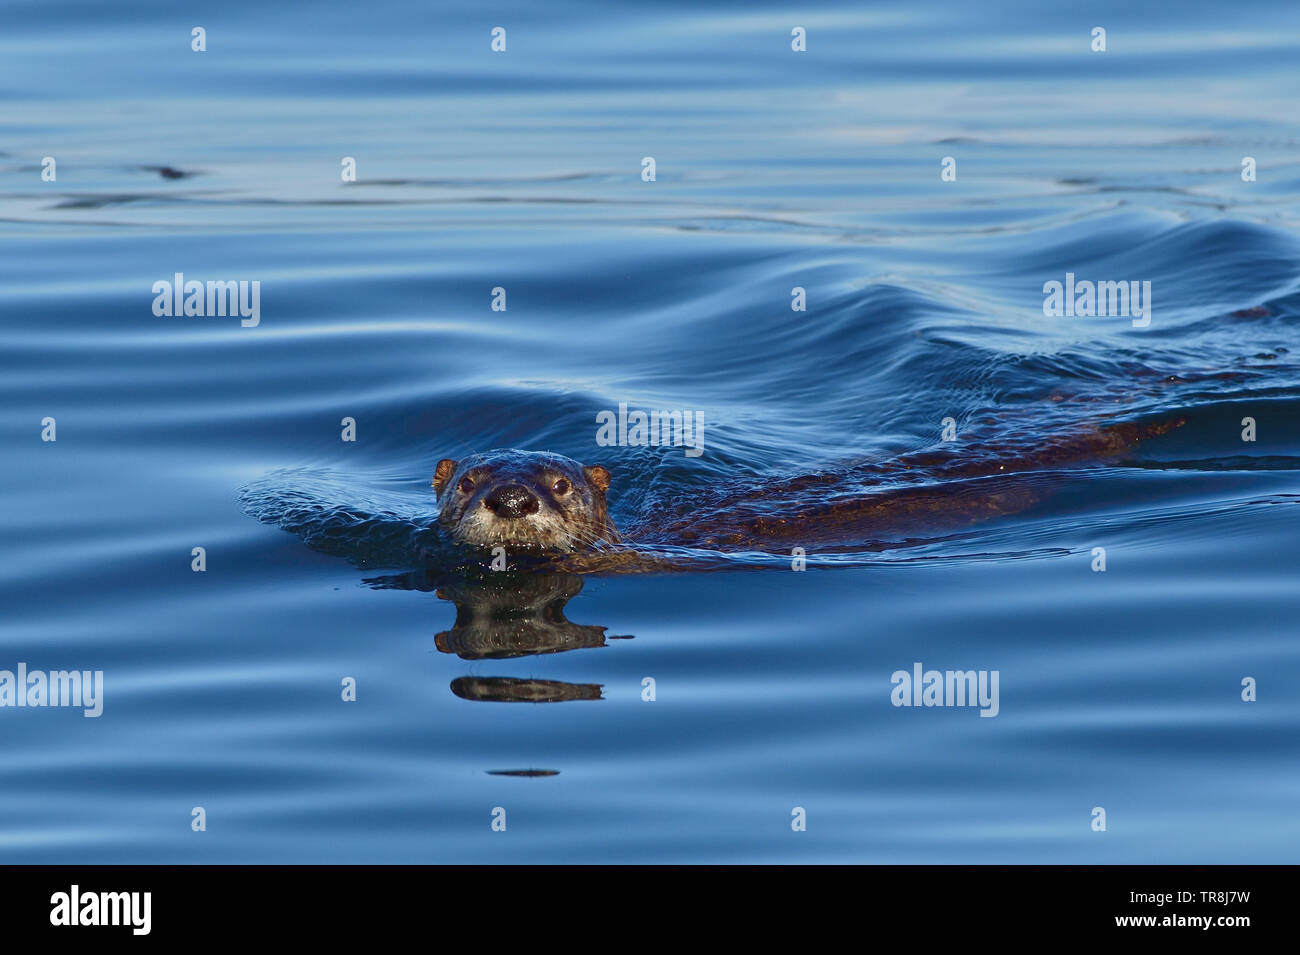 A river otter "Lutra canadensis", swimming in the blue waters of the Stewart Channel off the coast of Vancouver Island British Columbia Canada Stock Photo